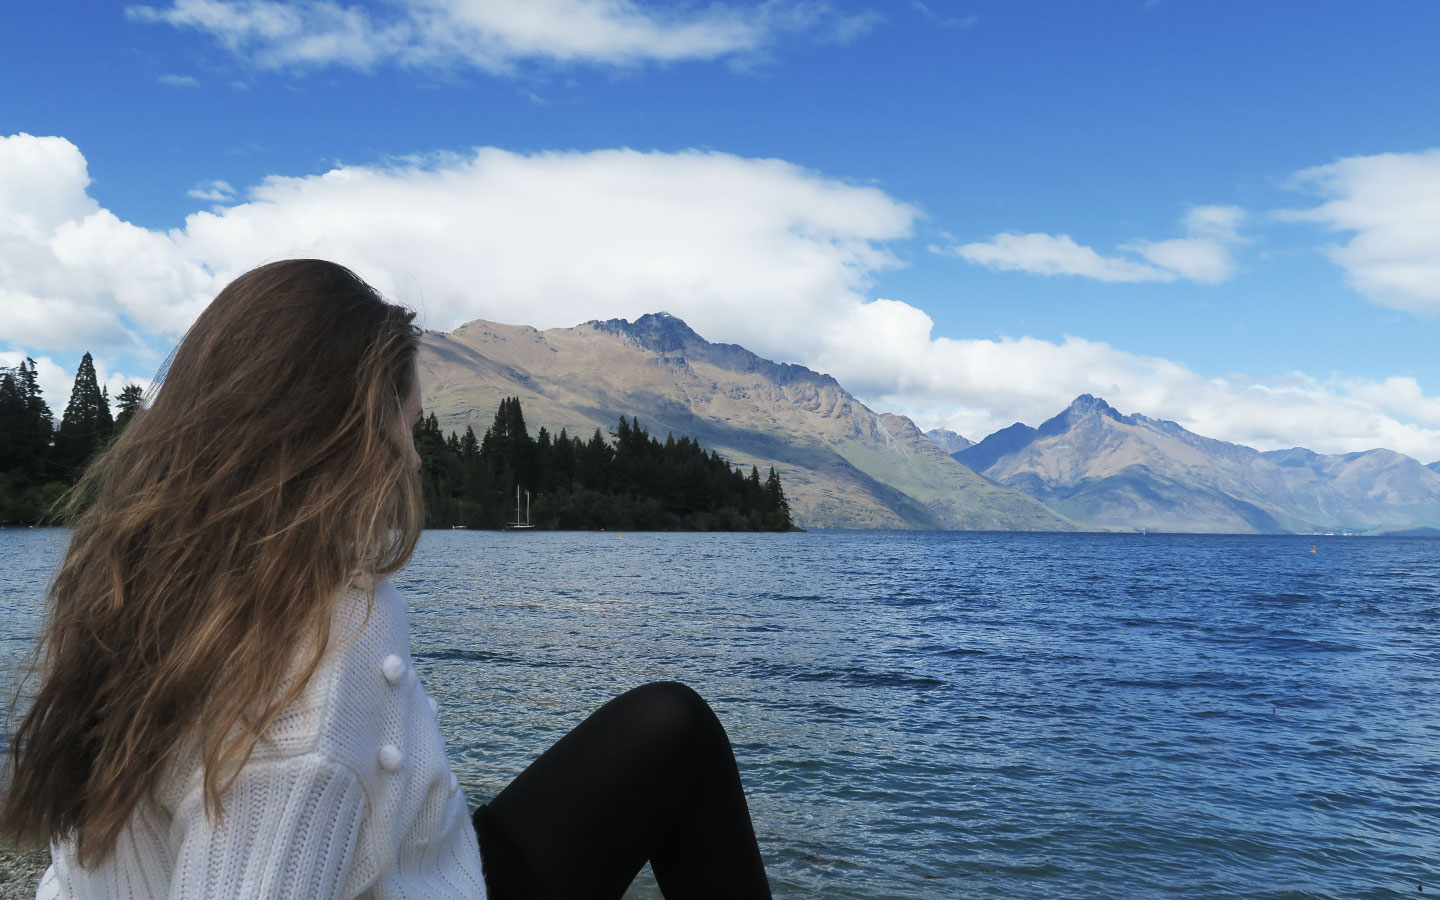 meliss carne sitting in front of mountains and lake wakatipu in new zealand